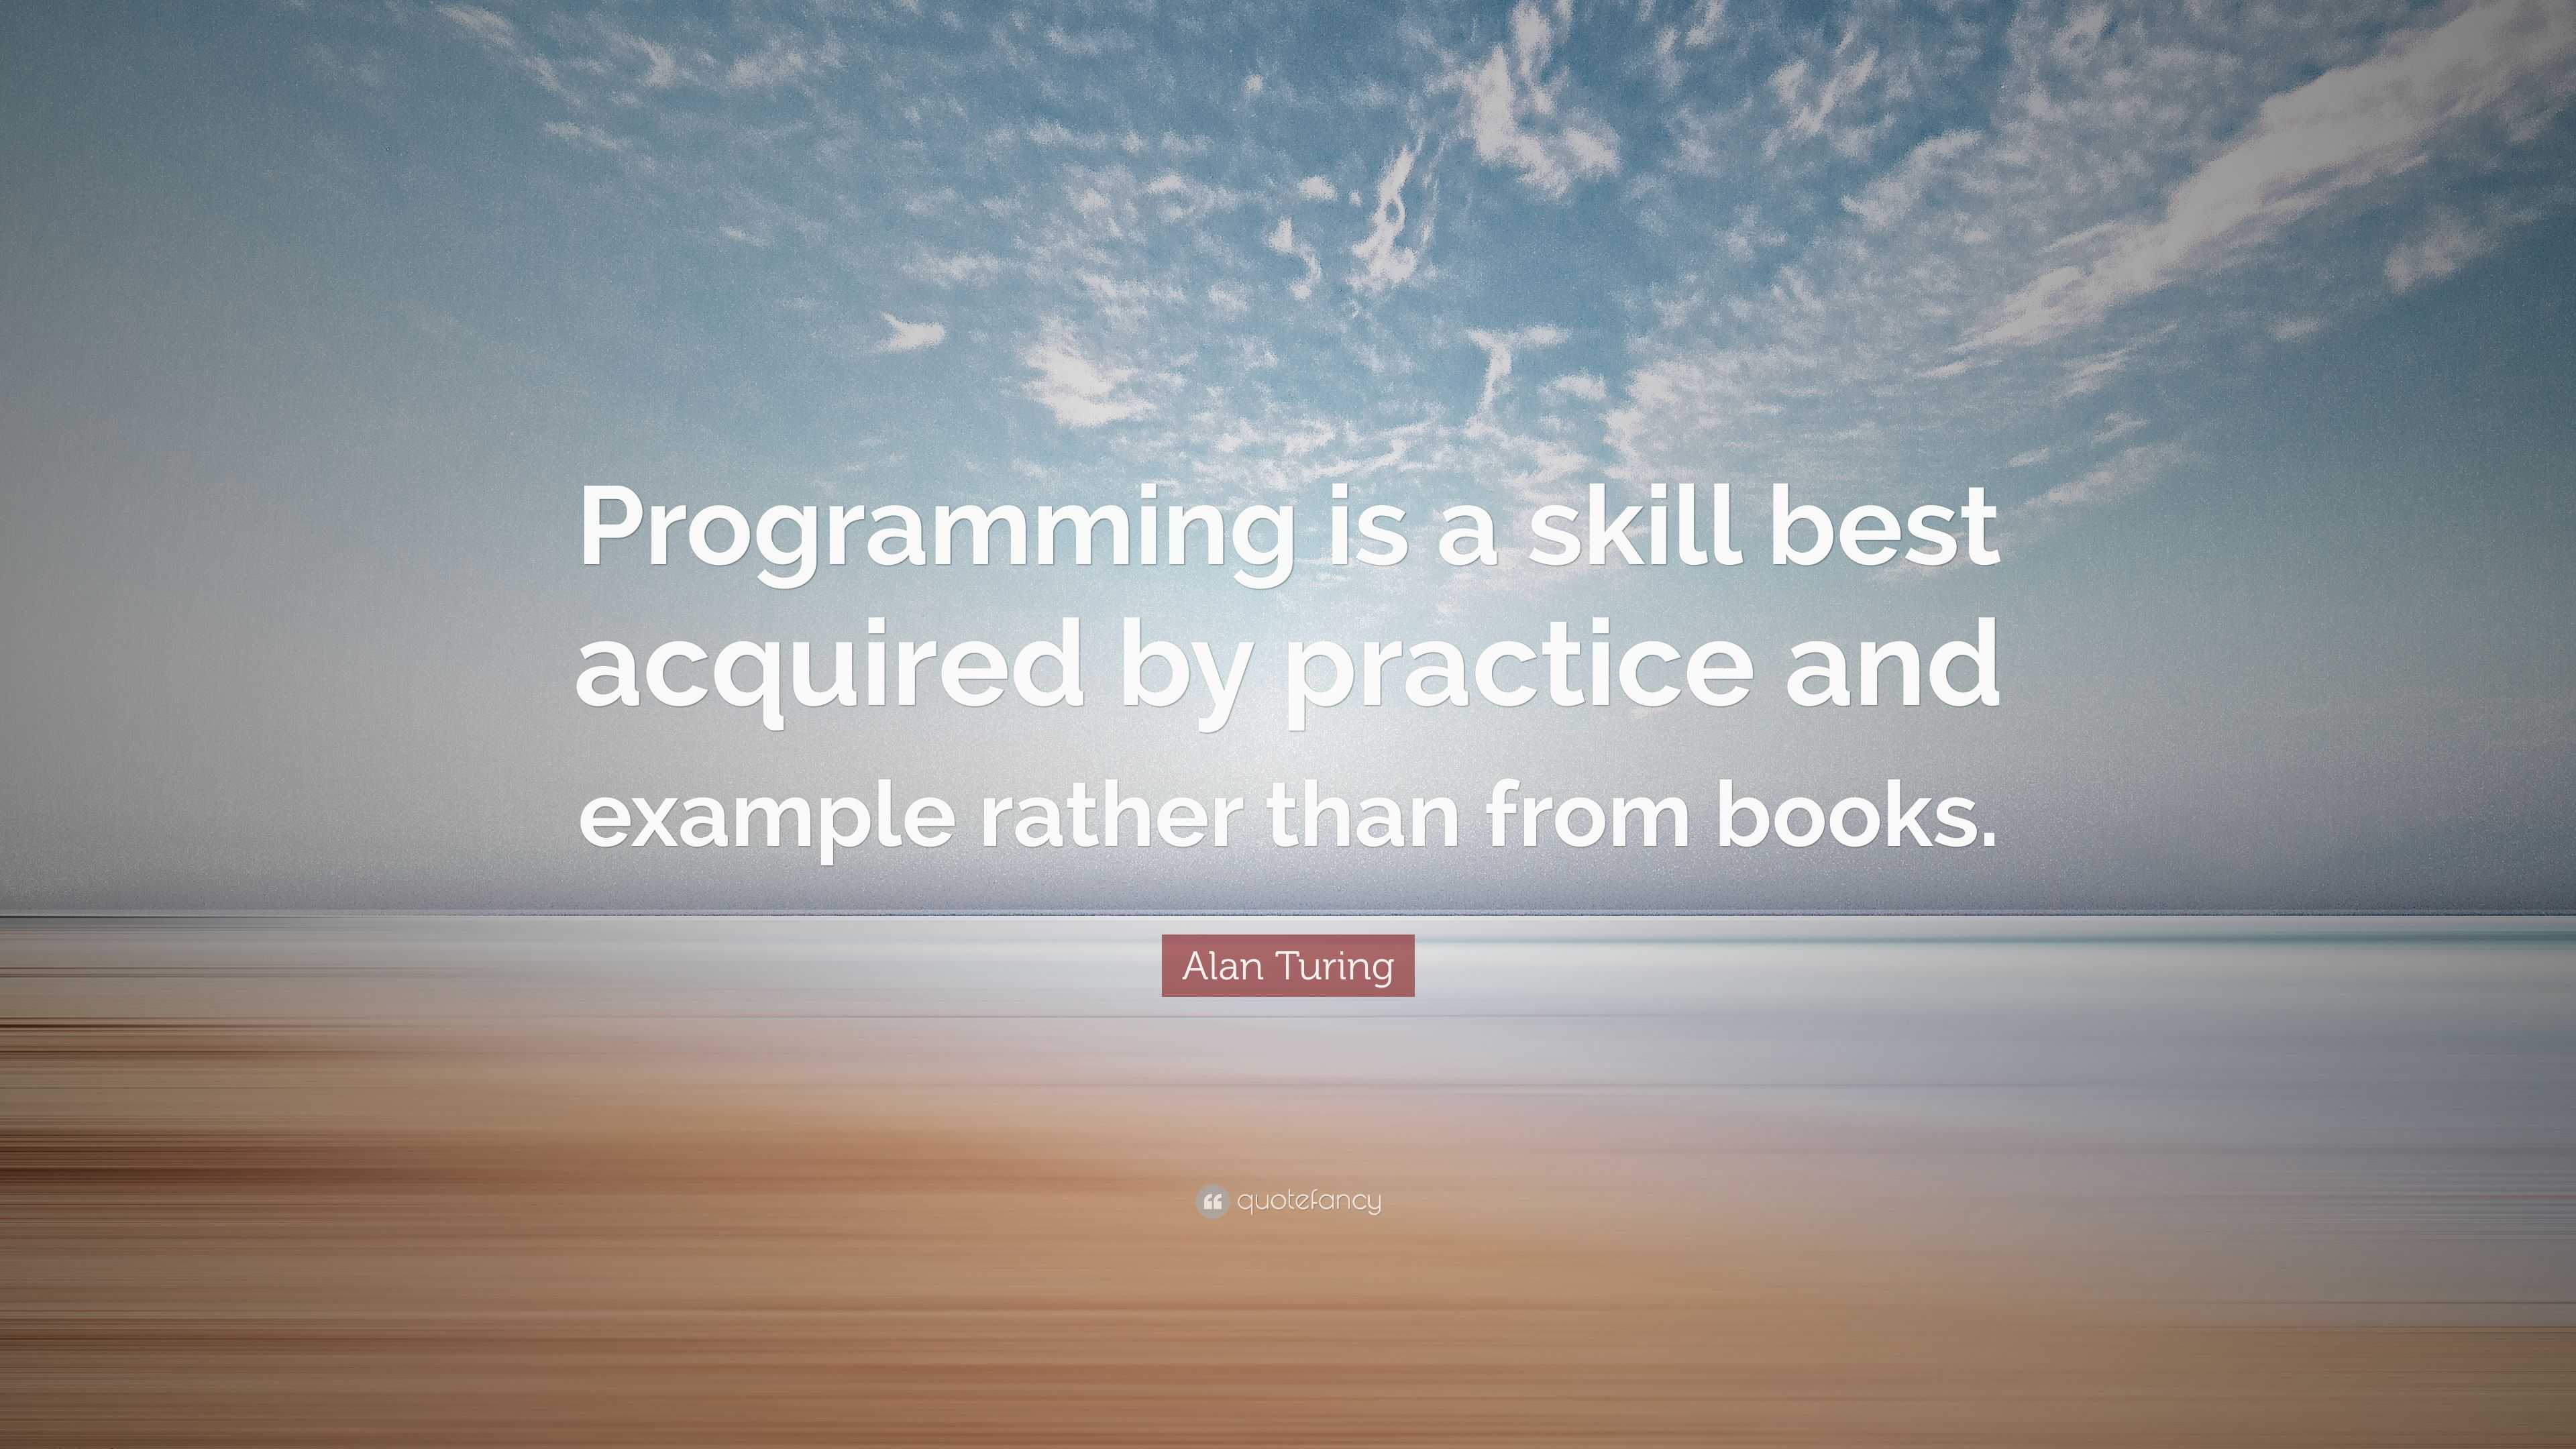 Alan Turing Quote: “Programming is a skill best acquired by practice